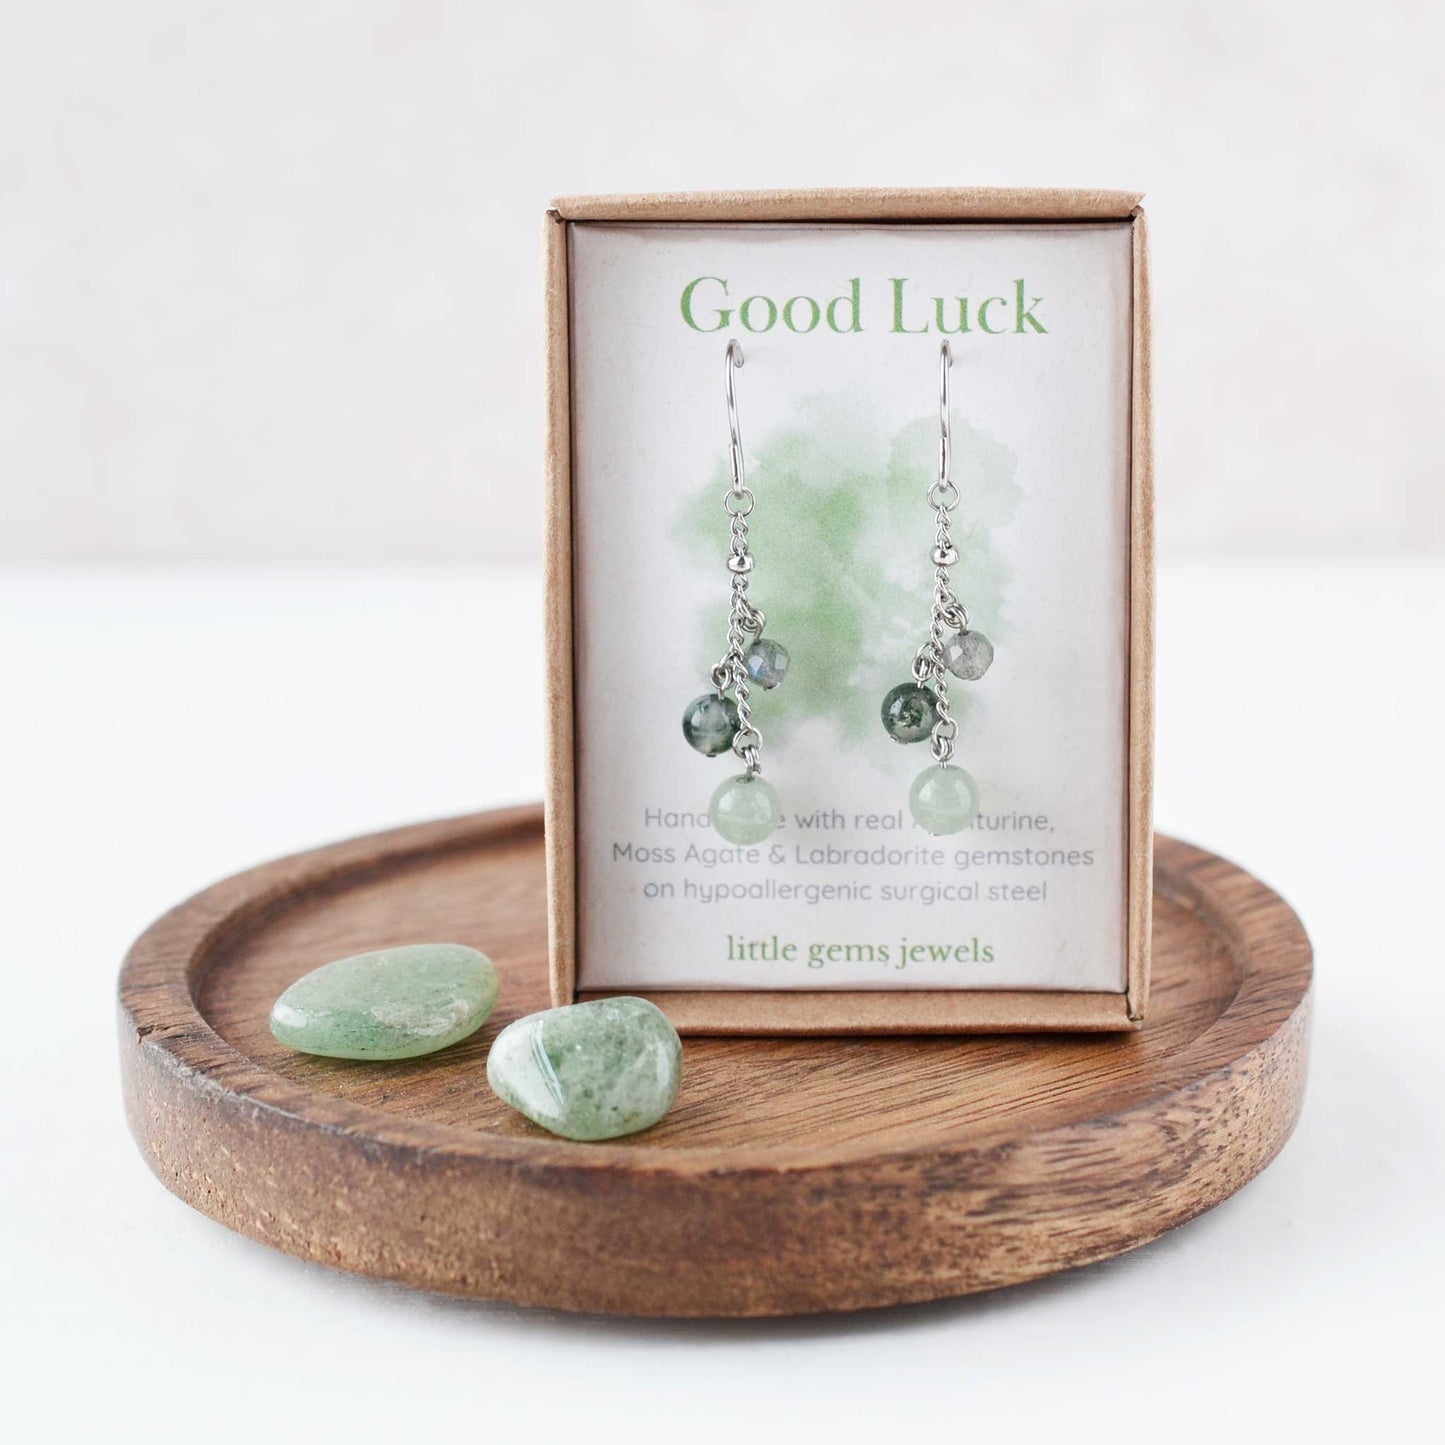 Gemstones for good luck drop earrings in eco friendly gift box